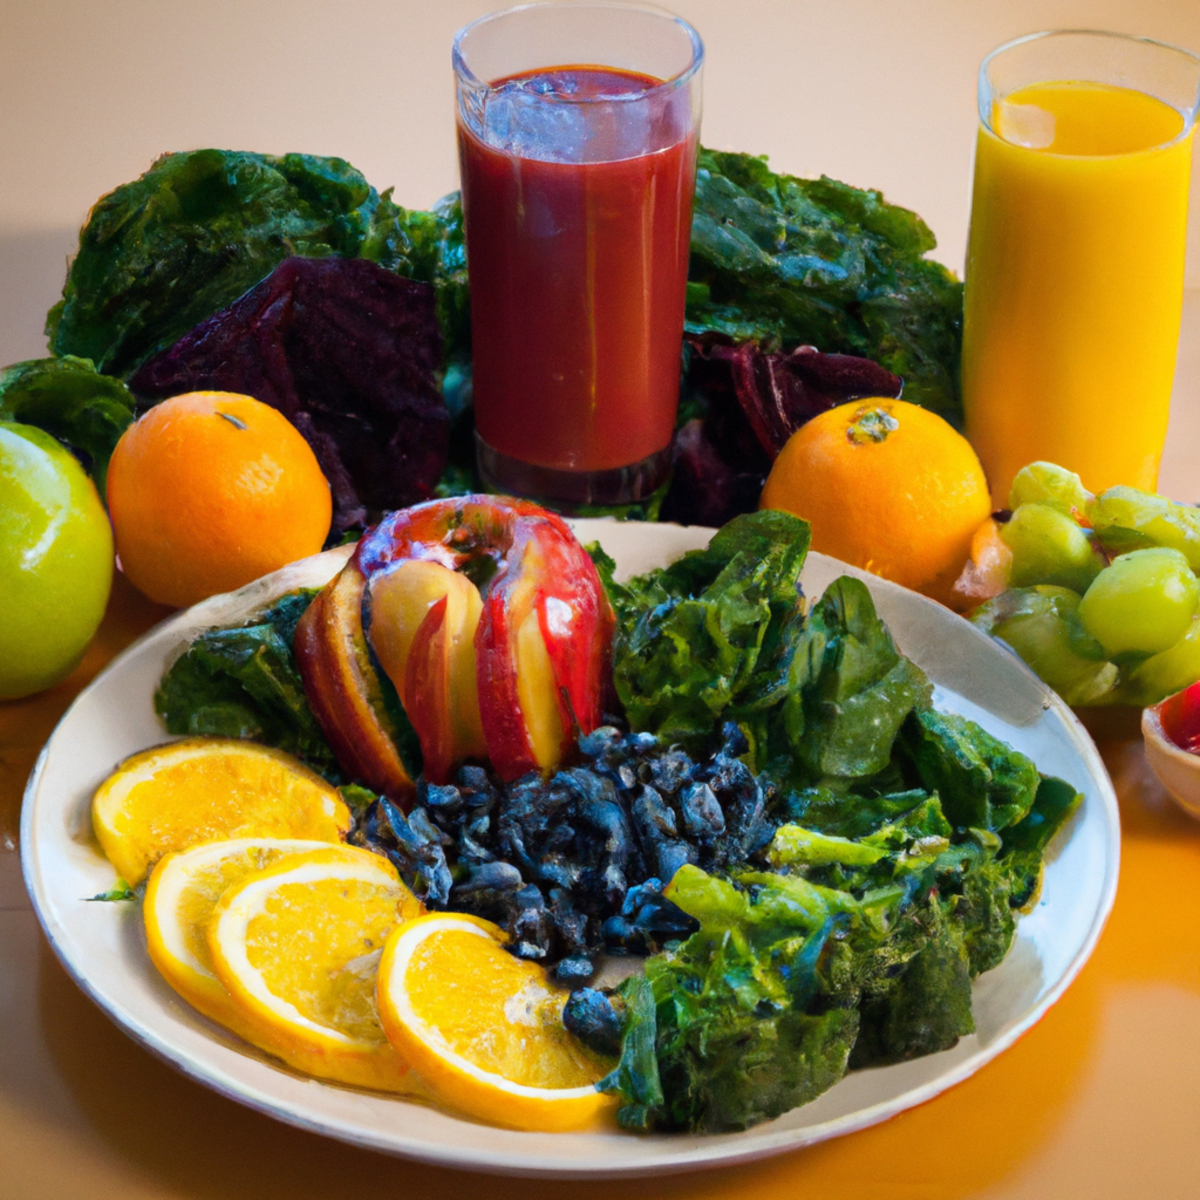 Colorful and nutritious dining table with fruits, vegetables, juice, grains, nuts, and seeds. Promotes balanced meal for health and weight management.